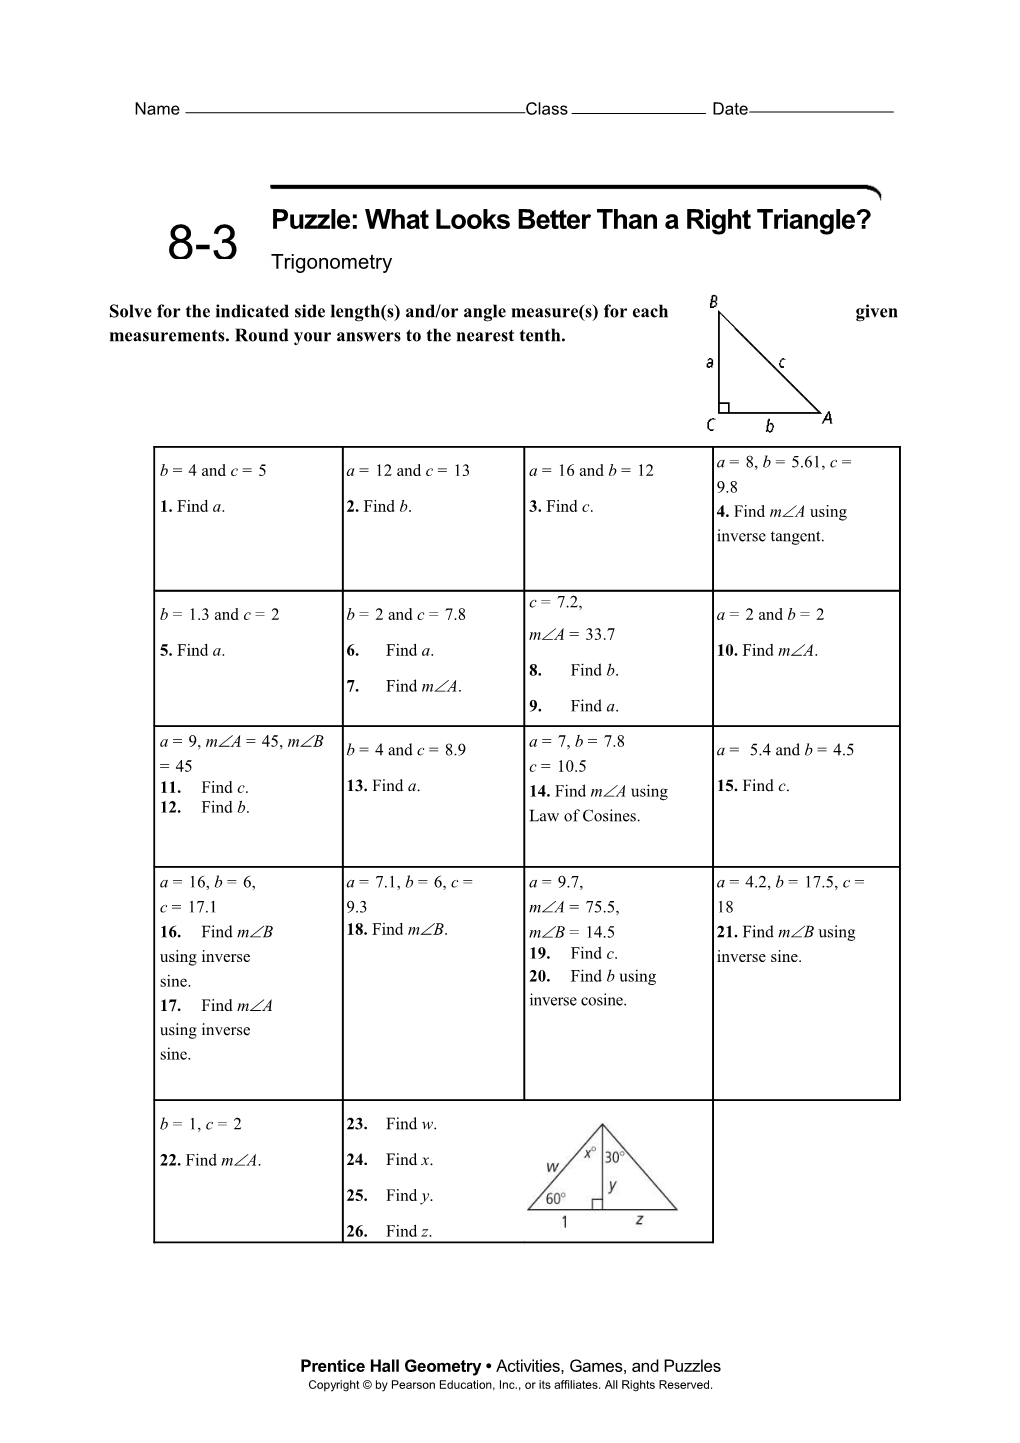 Puzzle: What Looks Better Than a Right Triangle?